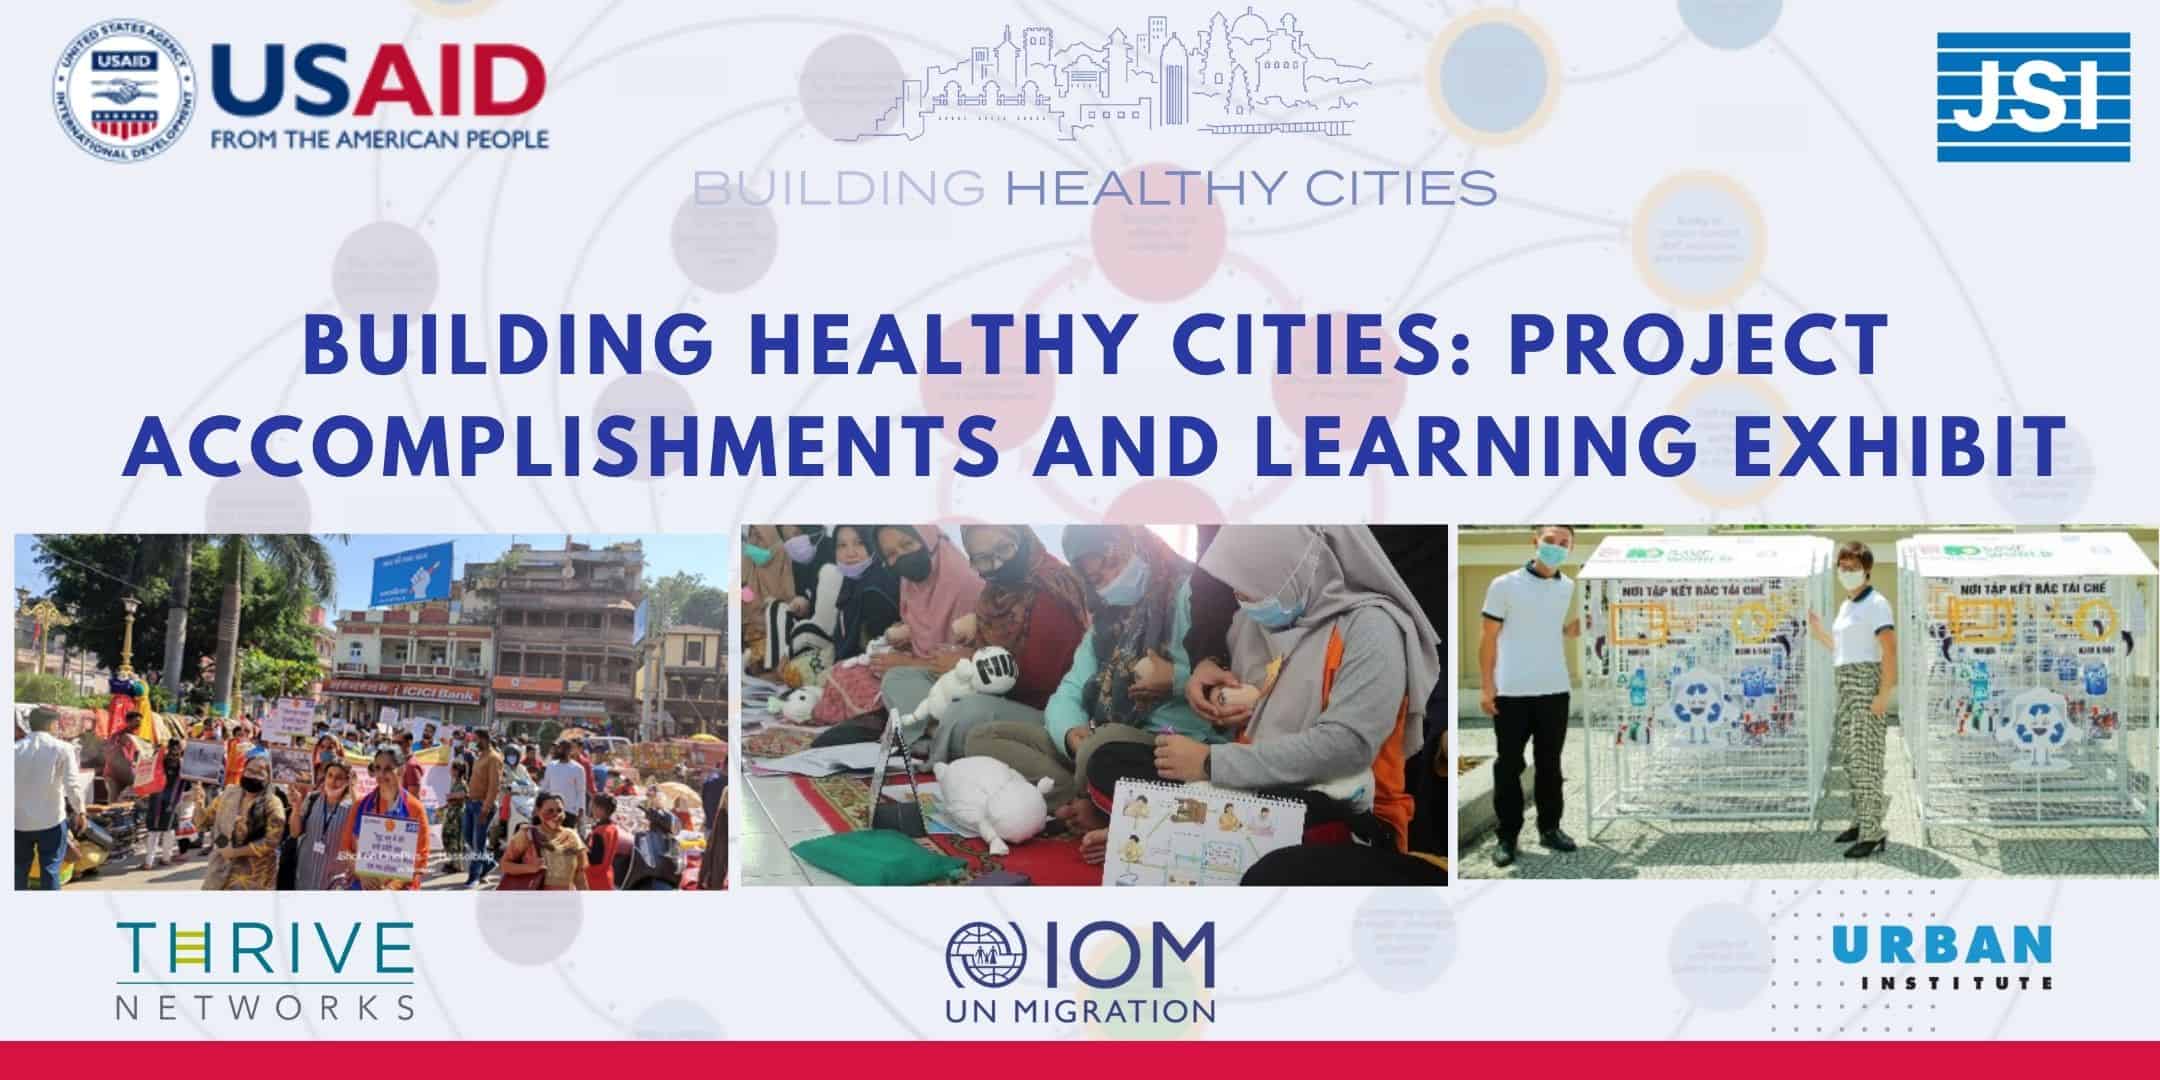 USAID-funded Building Healthy Cities Project Featured in July 29th Exhibit